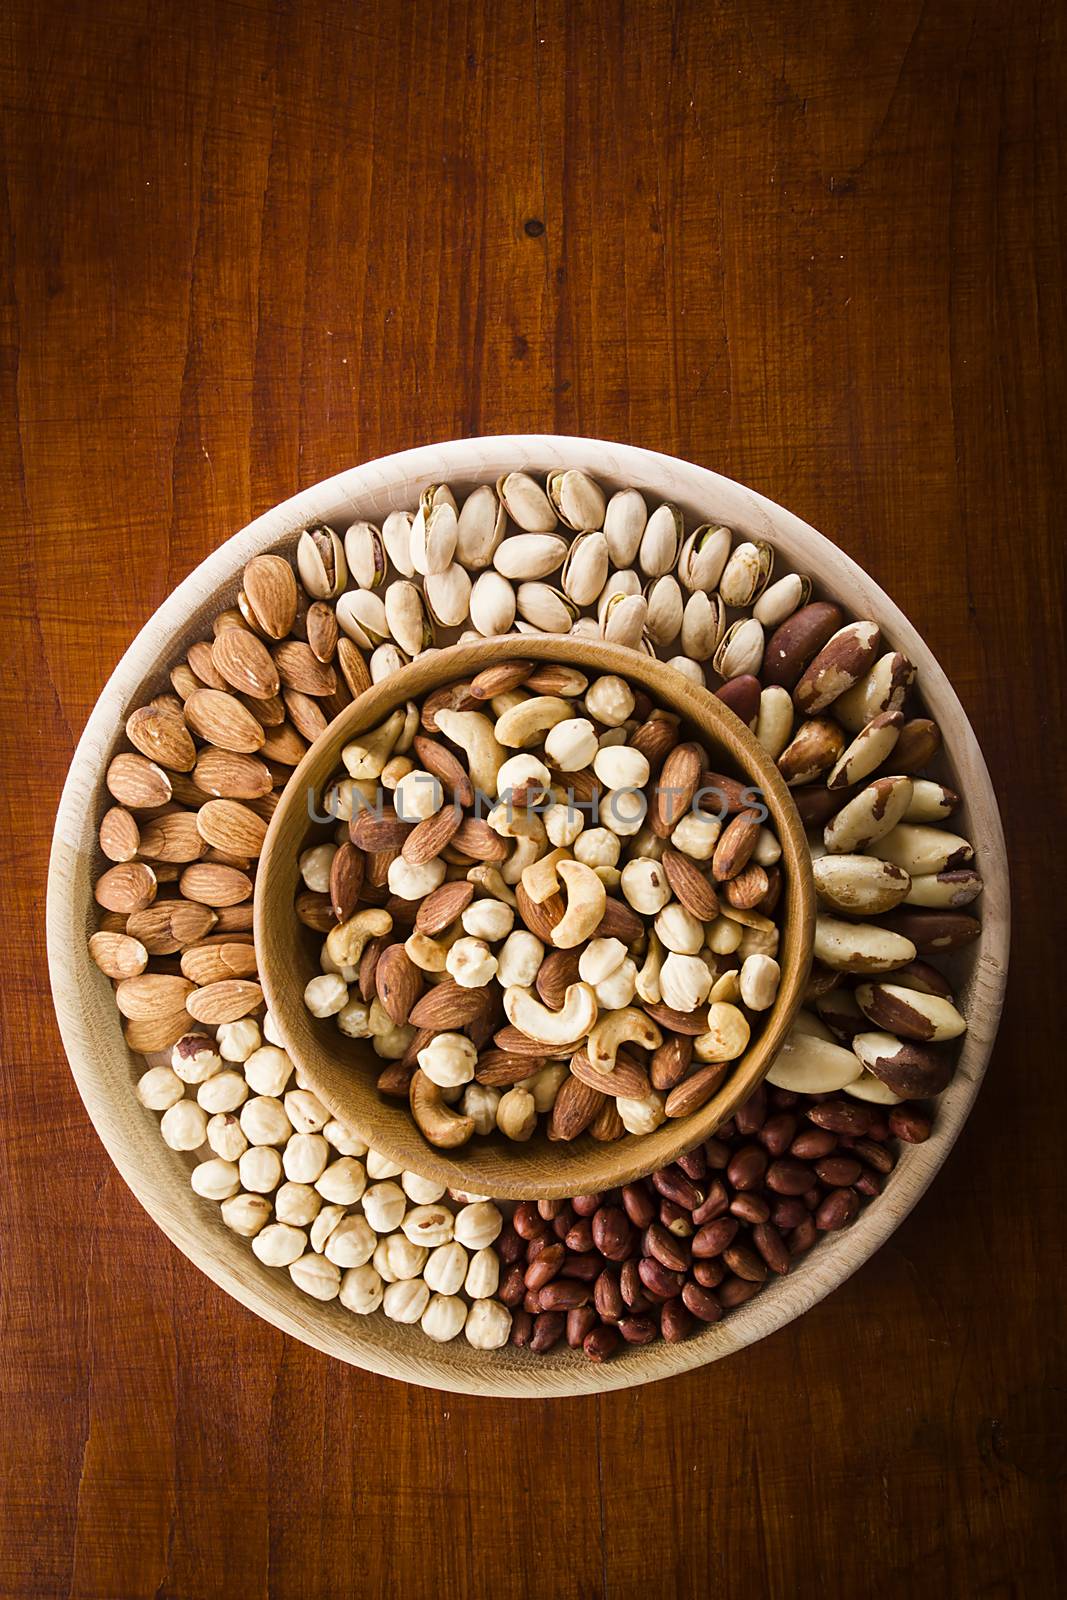 Set of various nuts in a wooden bowl